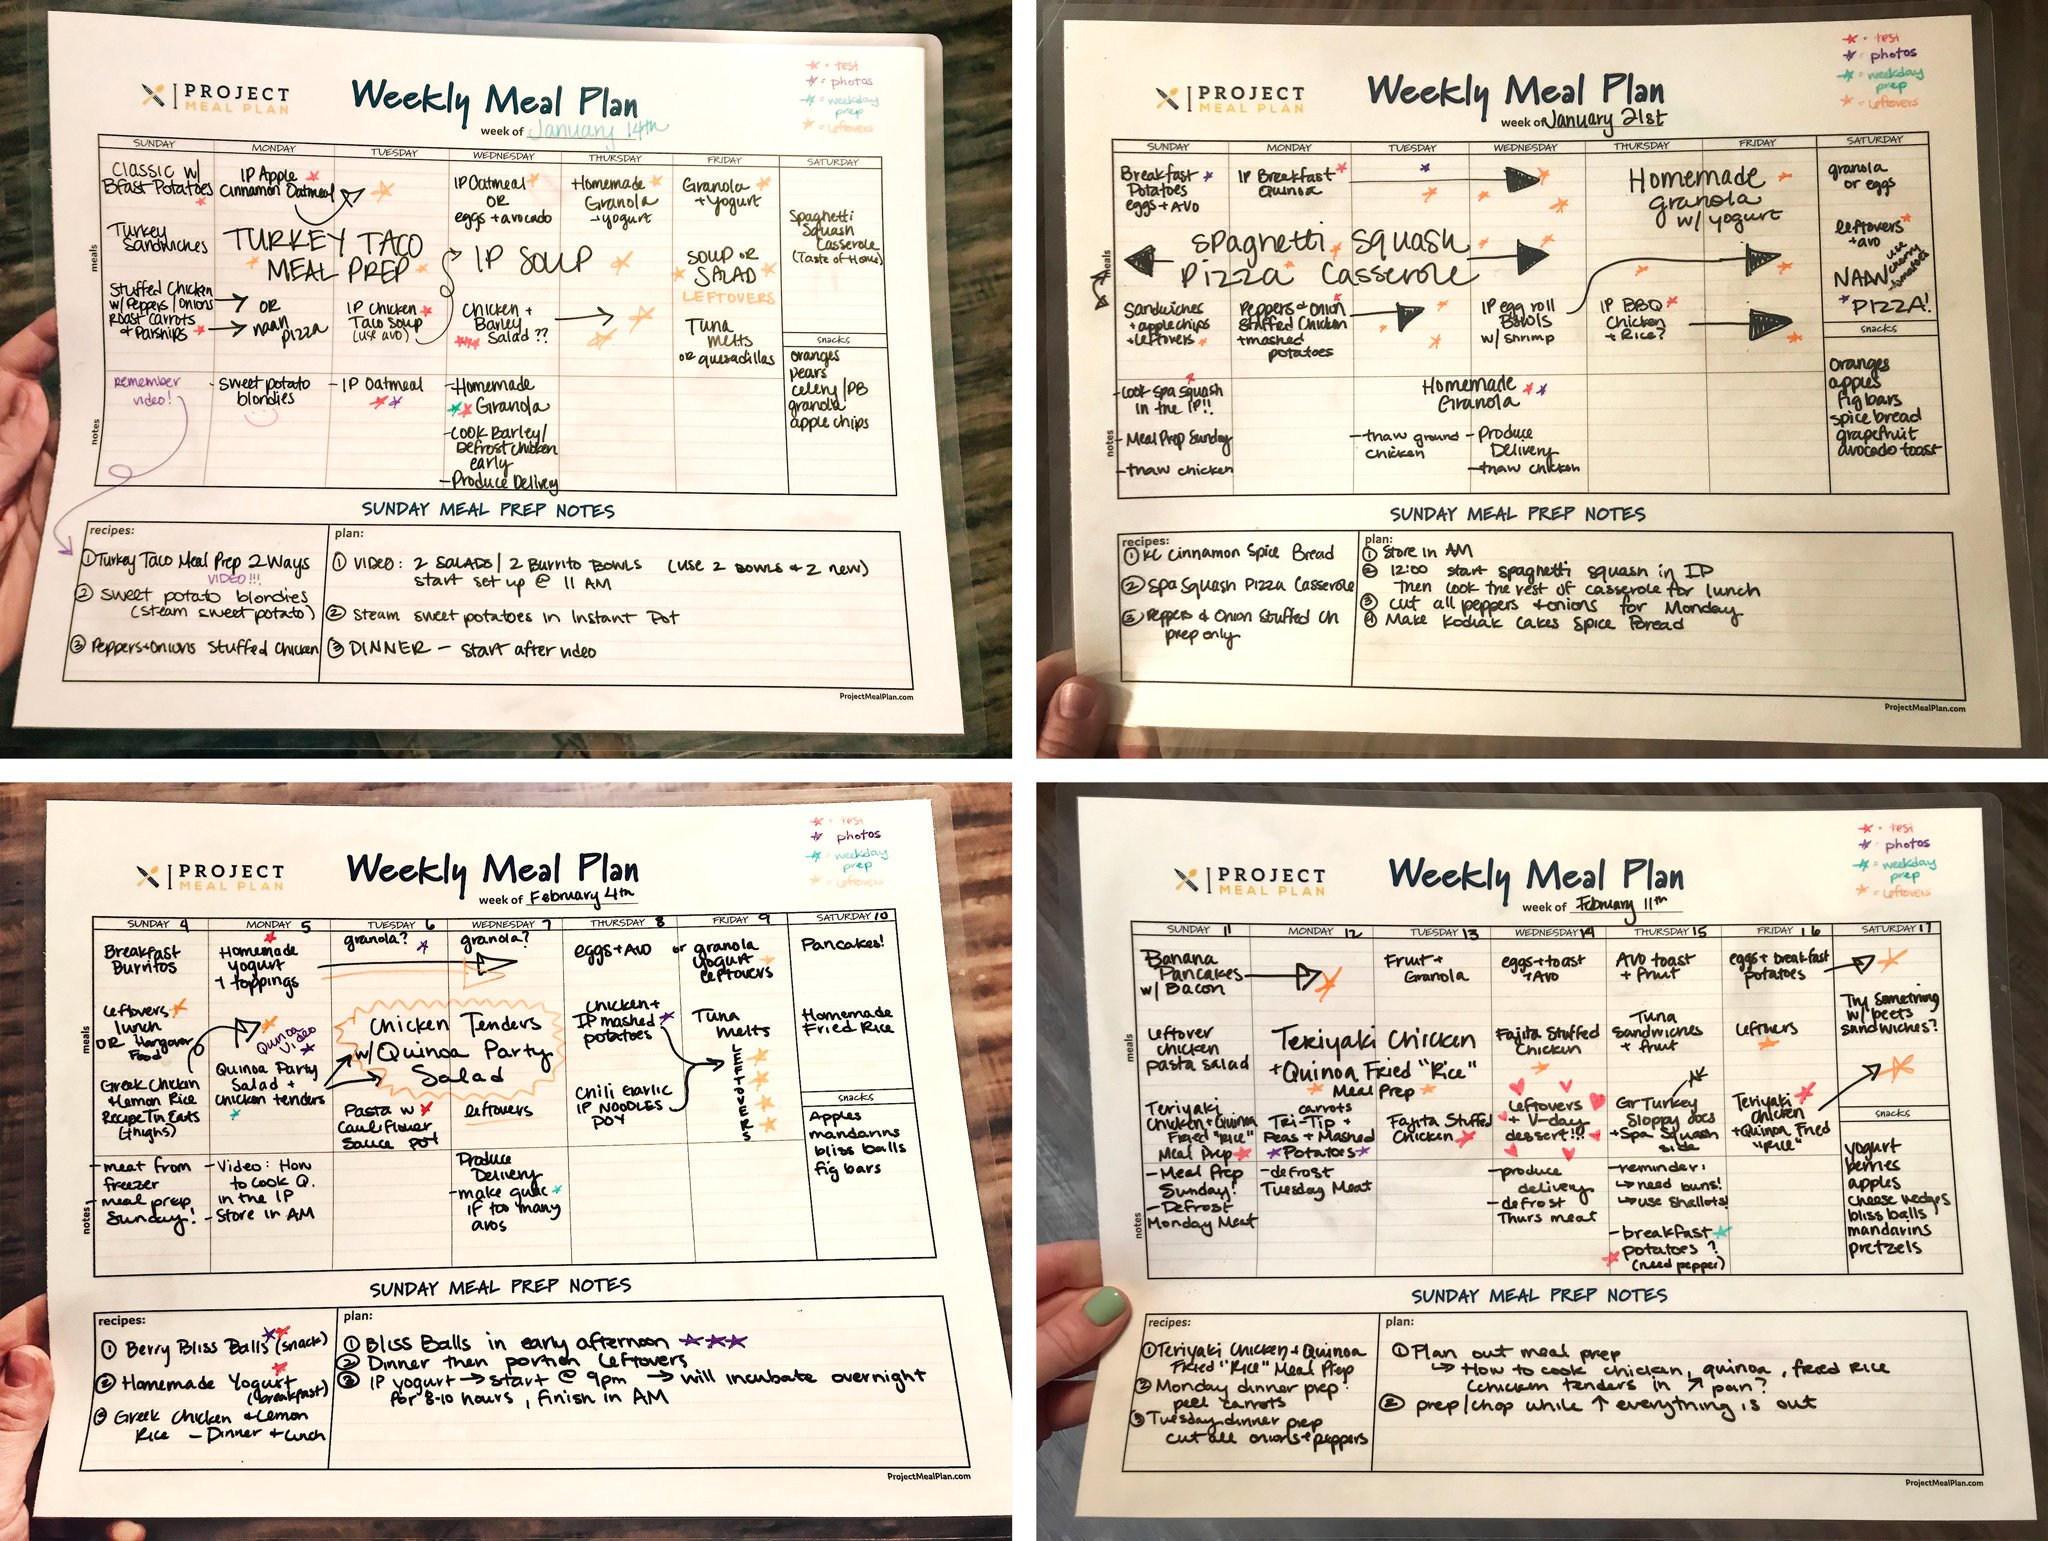 4 weeks of handwritten meal plans on the laminated Weekly Meal Planner chart.